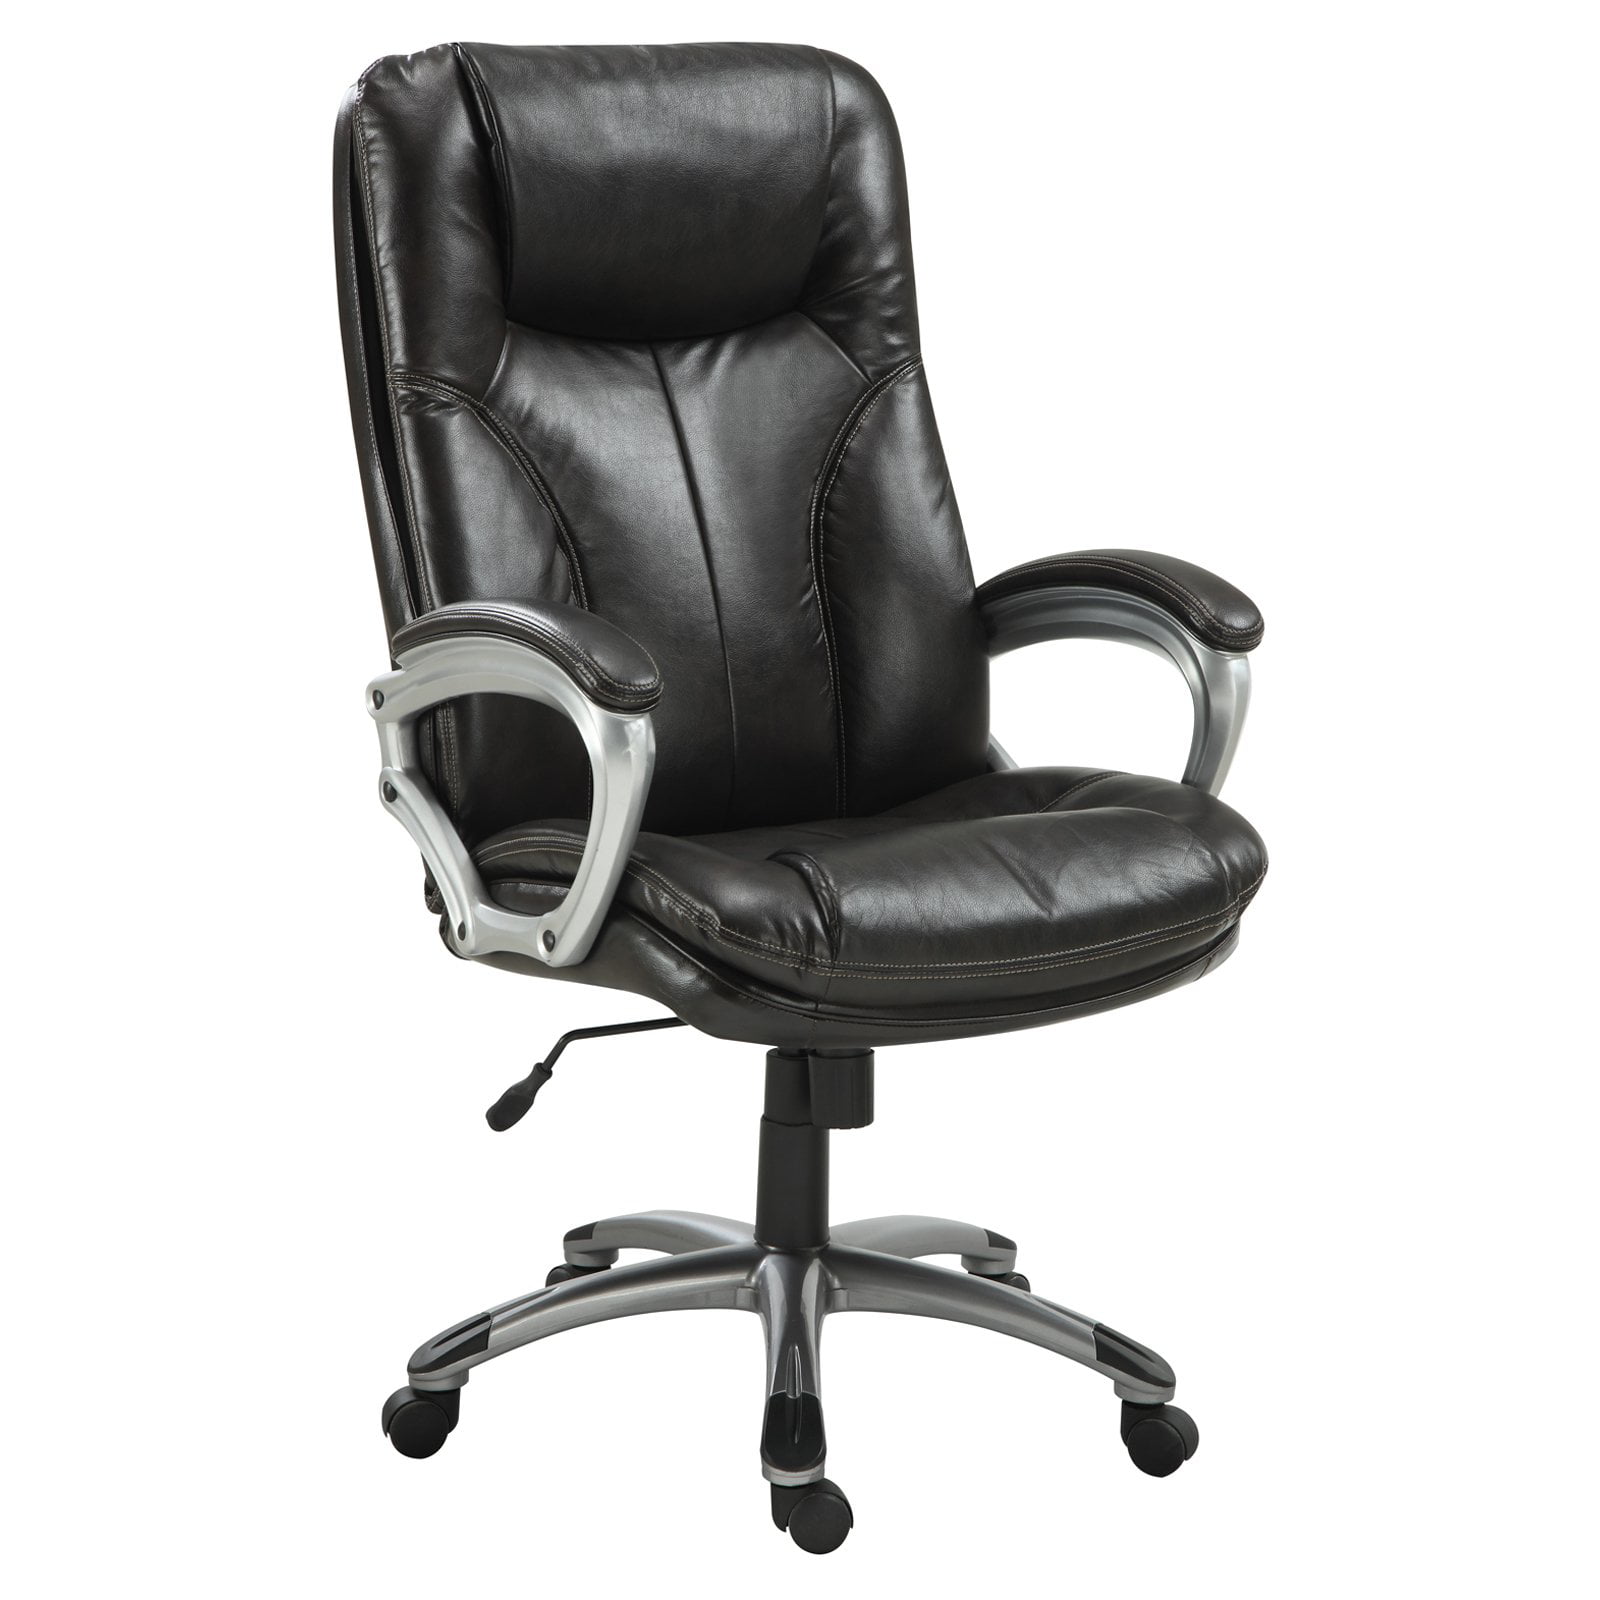 Serta Puresoft Faux Leather Executive Big & Tall Office Chair - Roasted ...